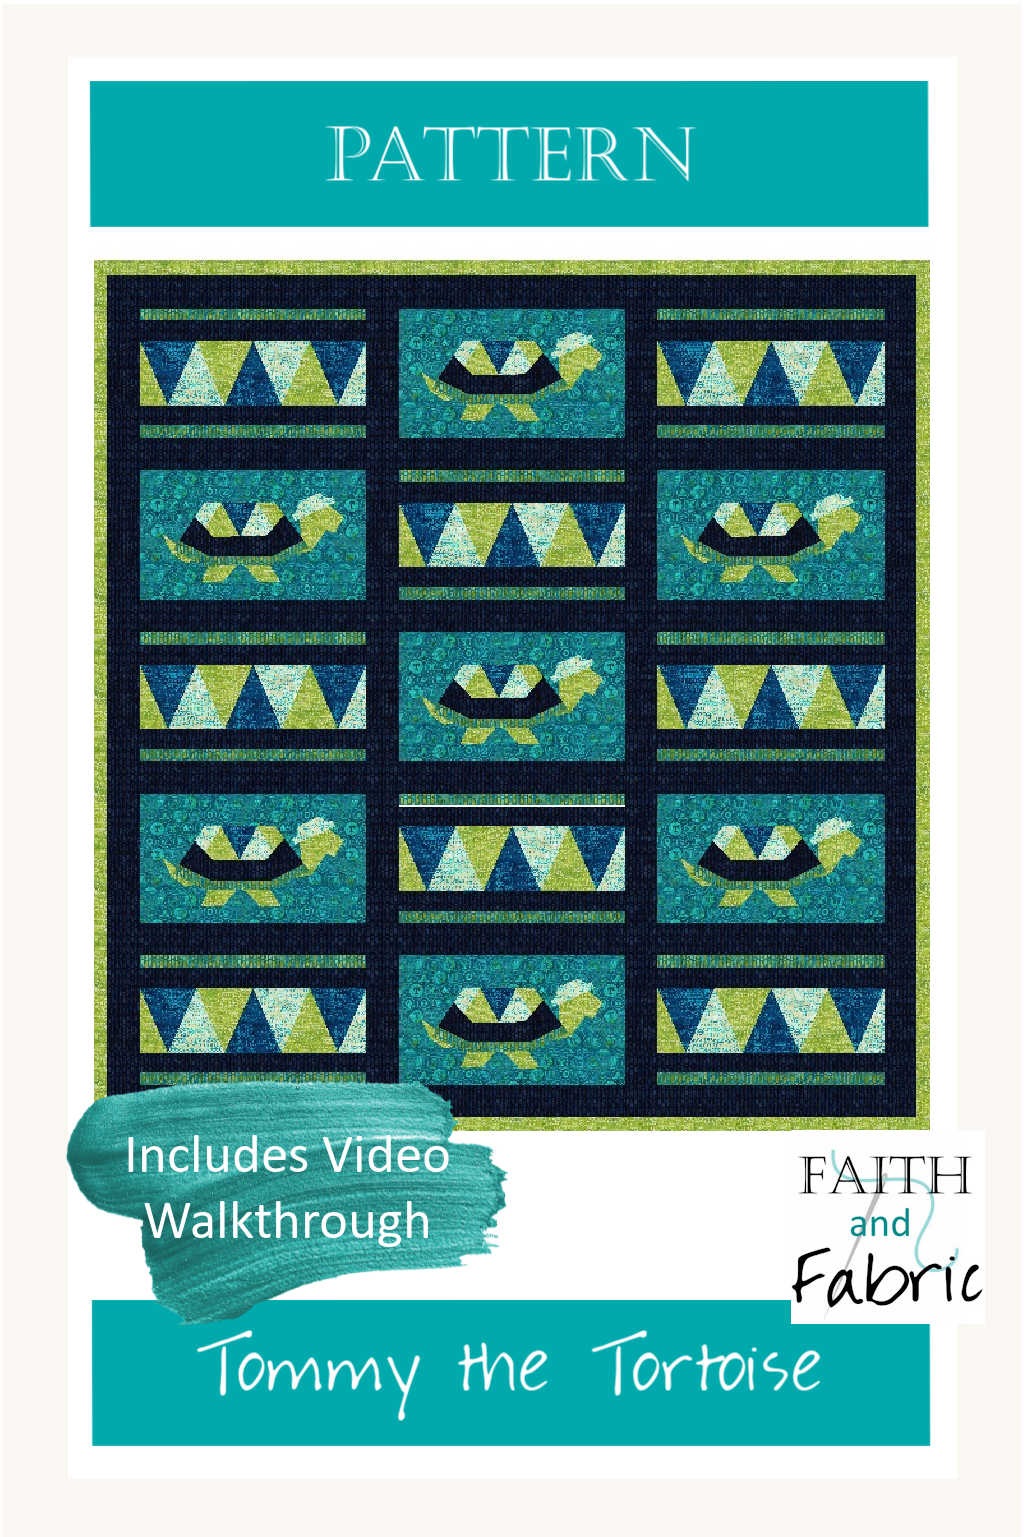 Some days we sprint towards the finish line, and other days we are the tortoise - slow and steady, one foot in front of the other, moving towards our goal. Share this beautiful tortoise quilt with someone you know who is facing an uphill challenge and help them remember that they can still win the race...one step at a time. This tortoise/turtle quilt pattern includes the FPP patterns, instructions to make the quilt top, fabric requirements, a coloring sheet, and more.